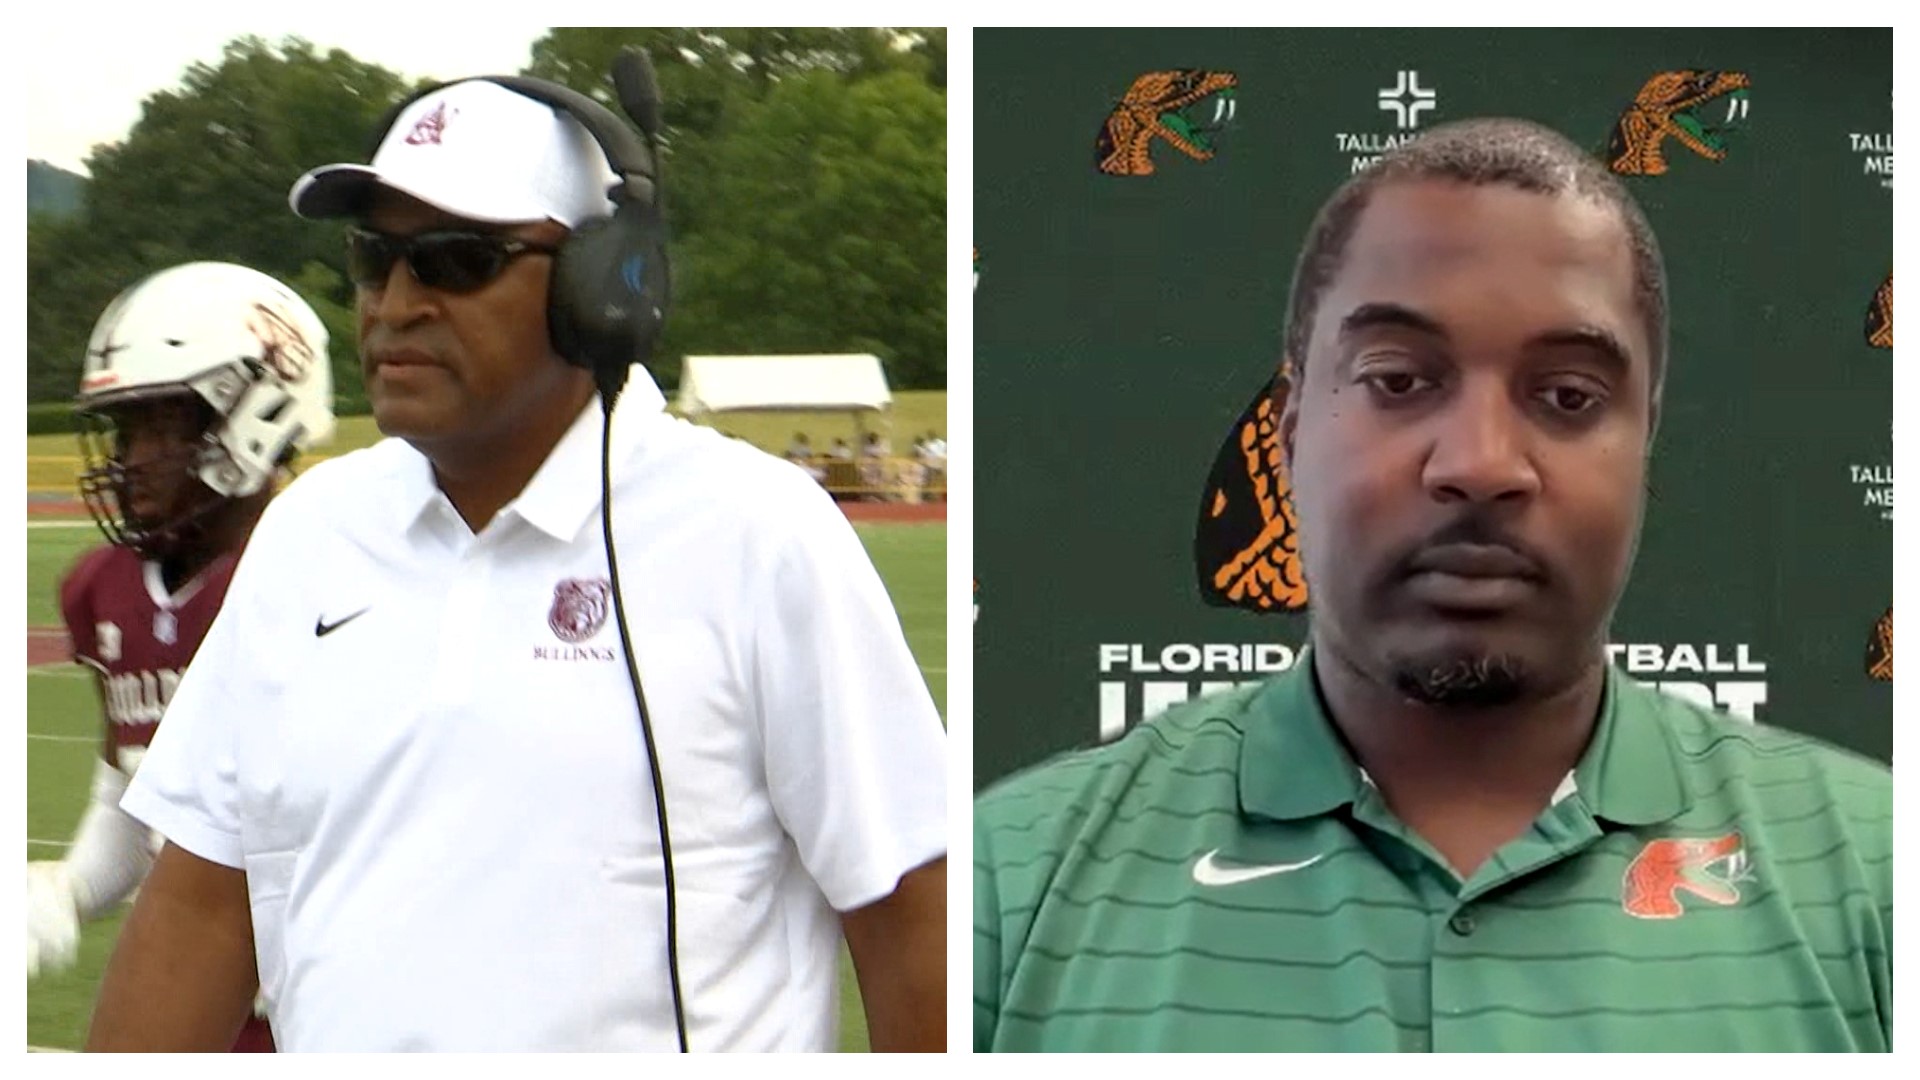 The Alabama A&M Bulldogs travel to Tallahassee, Florida for an early season SWAC matchup between east division foes. Both teams are searching for their 1st SWAC win